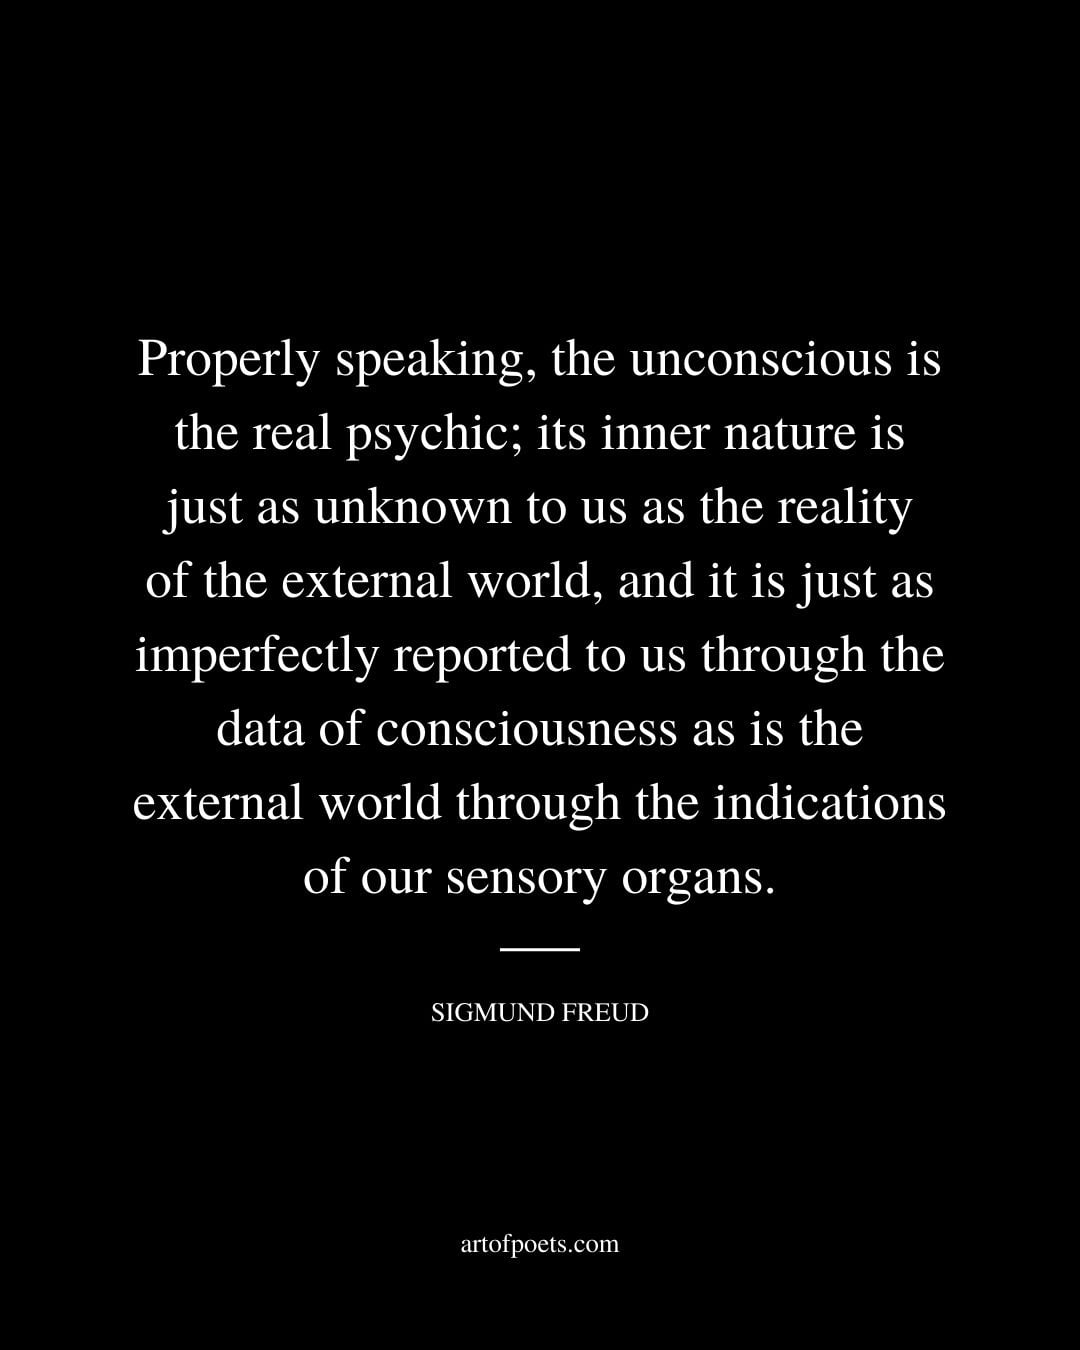 Properly speaking the unconscious is the real psychic its inner nature is just as unknown to us as the reality of the external world